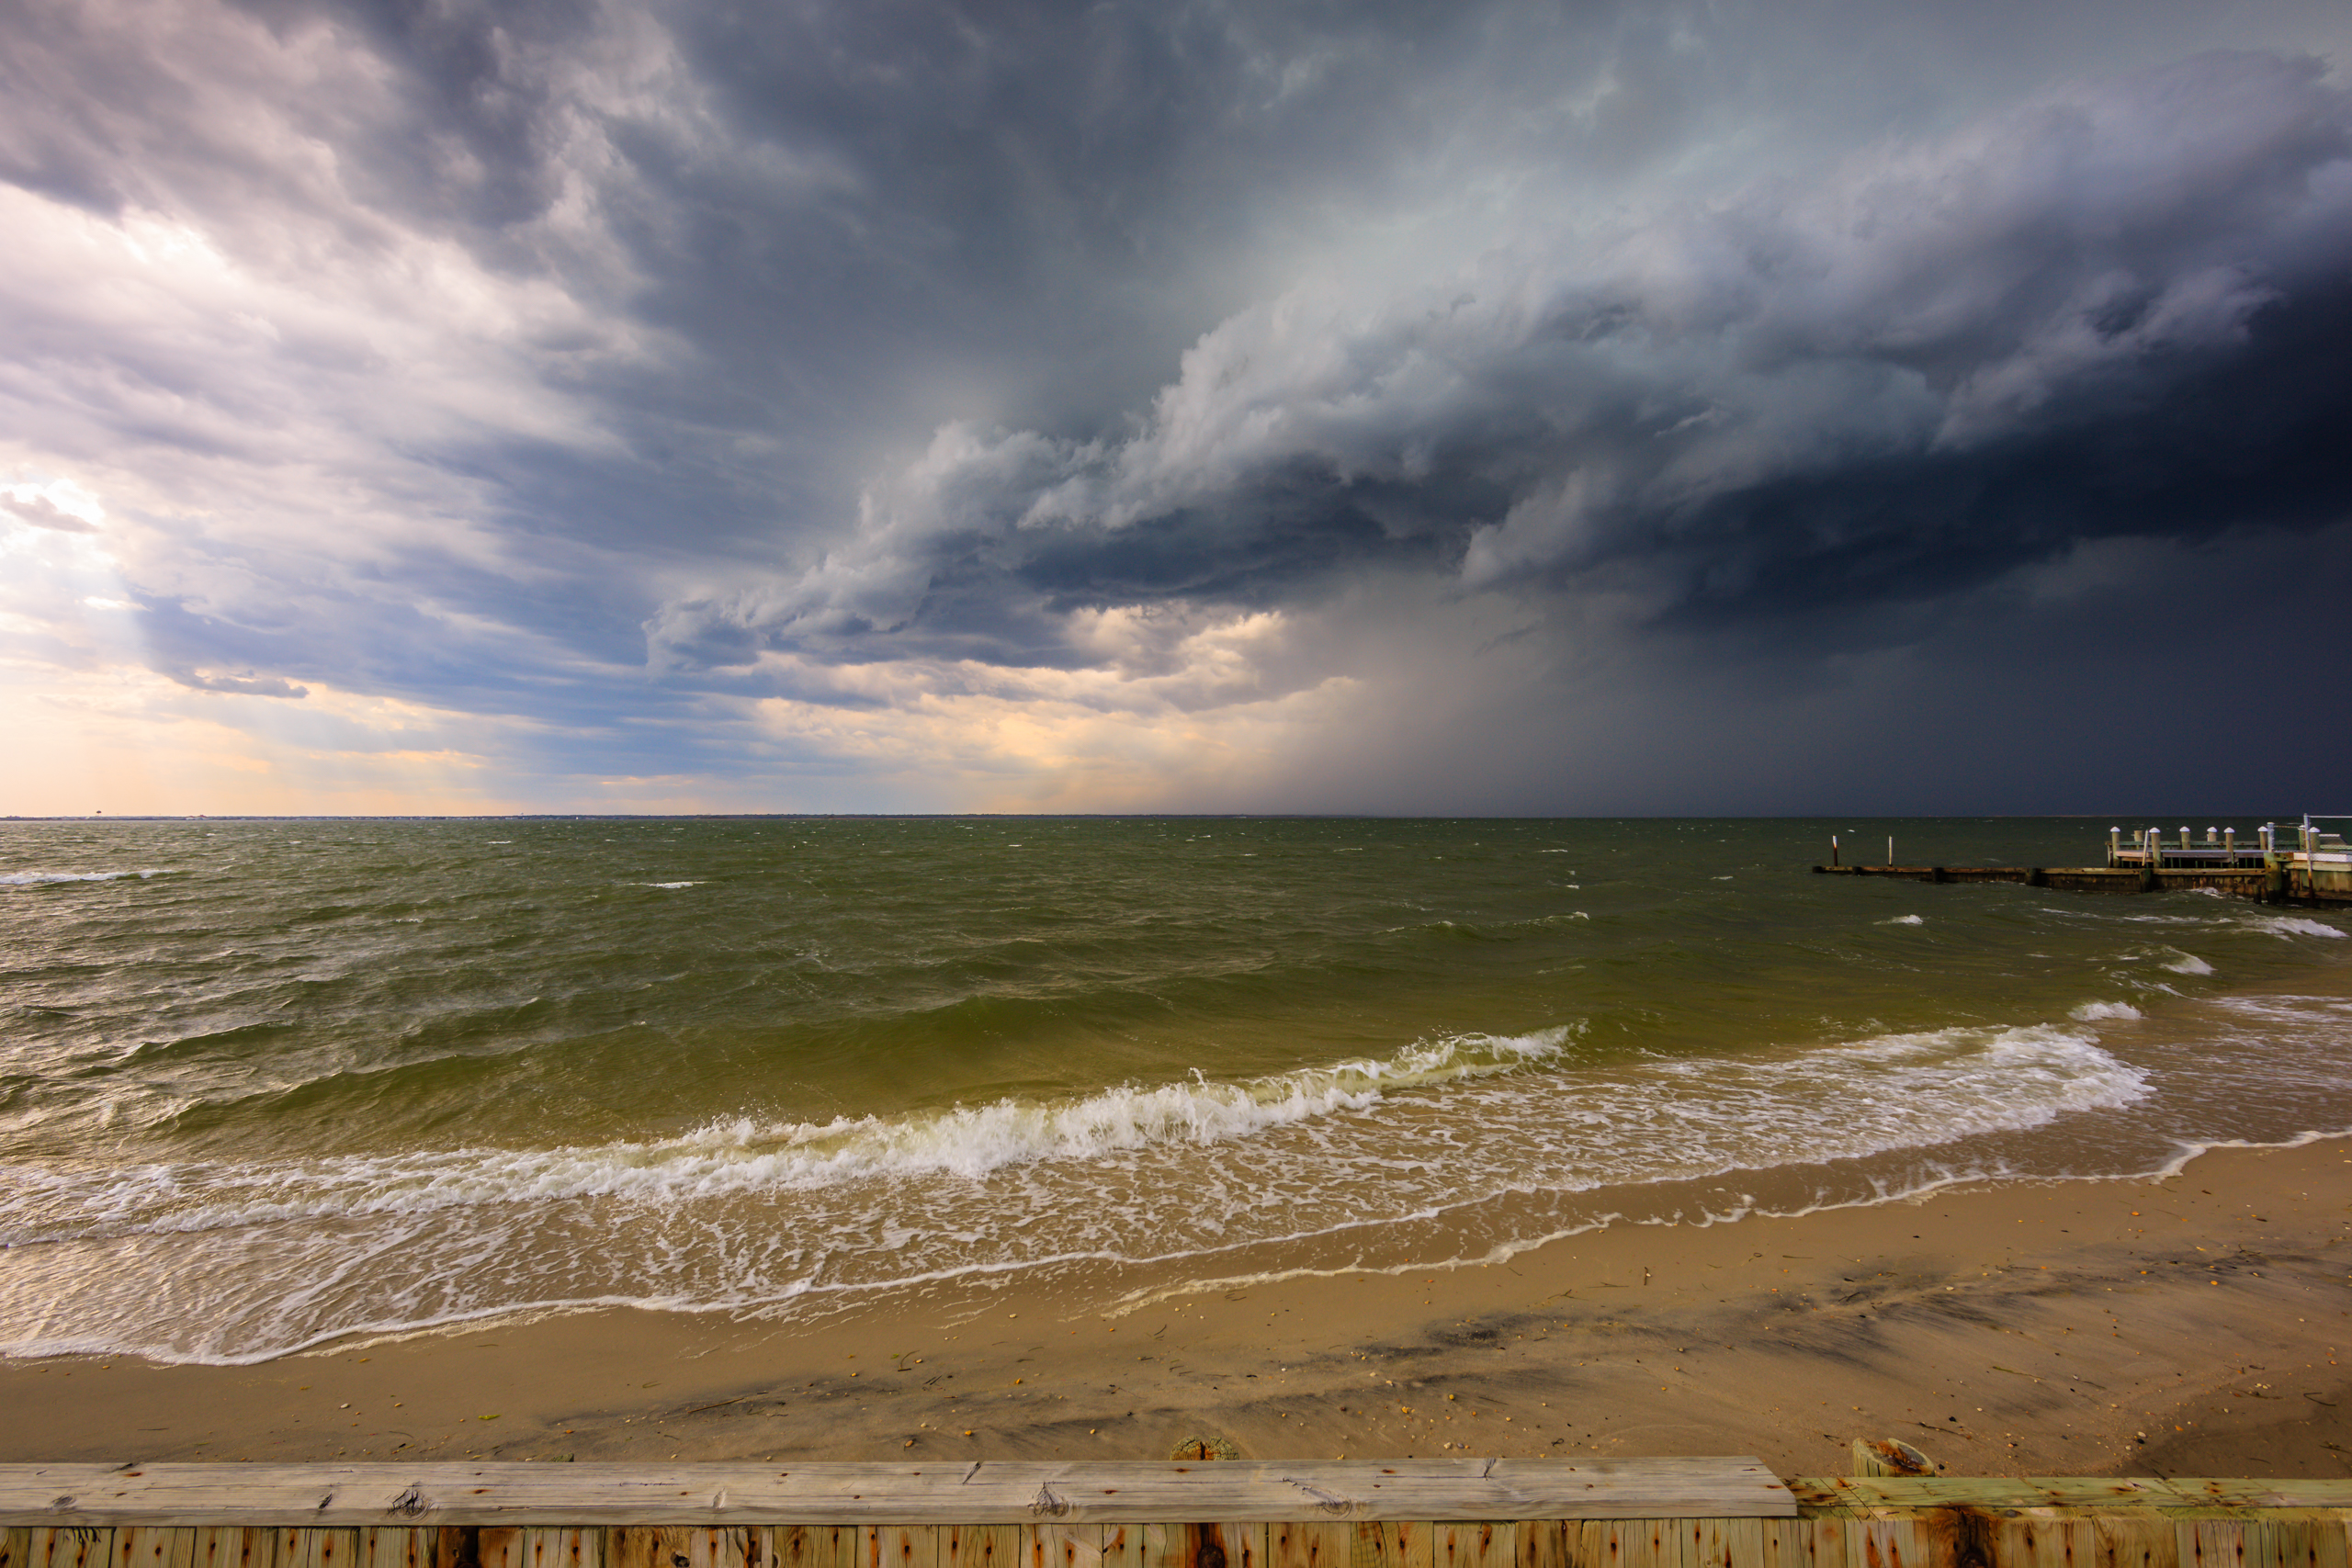 Wide angle photograph of an ominous shelf cloud storming over Barnegat Bay en route to Long Beach Island